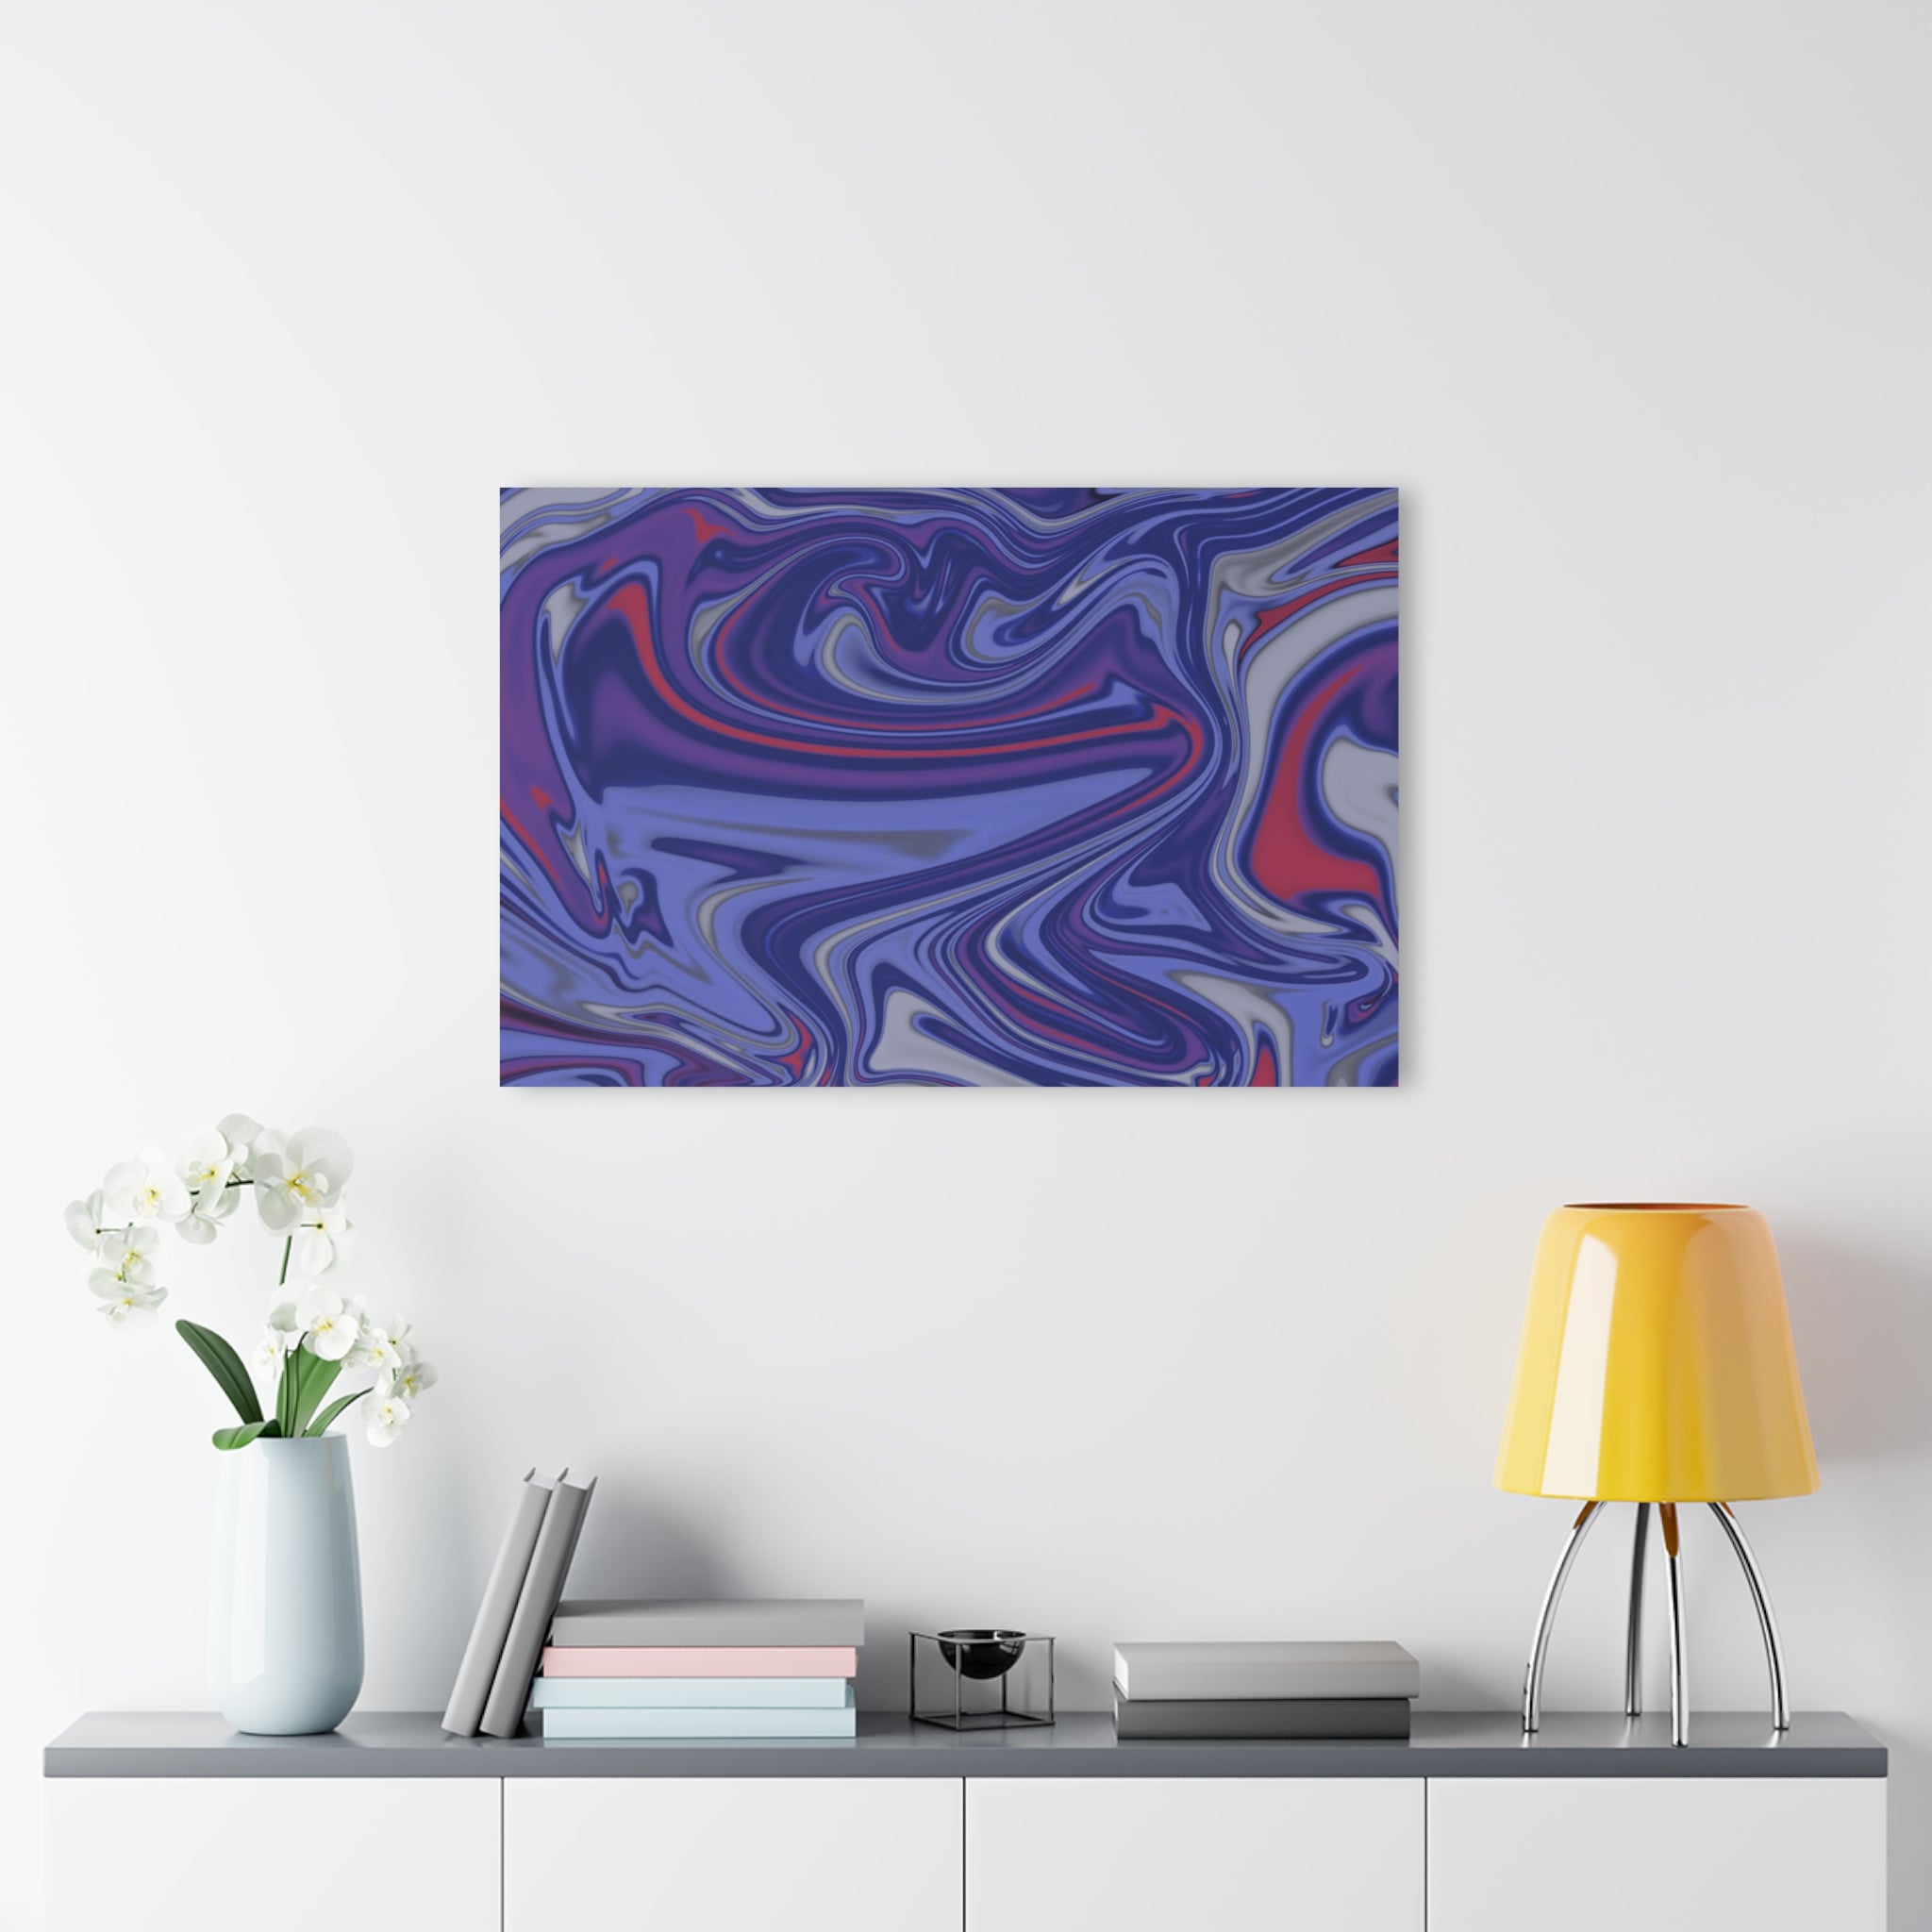 Have A Good Trip Acrylic Print | 36x24 Inch | Fluid Abstract | Contemporary Wall Art